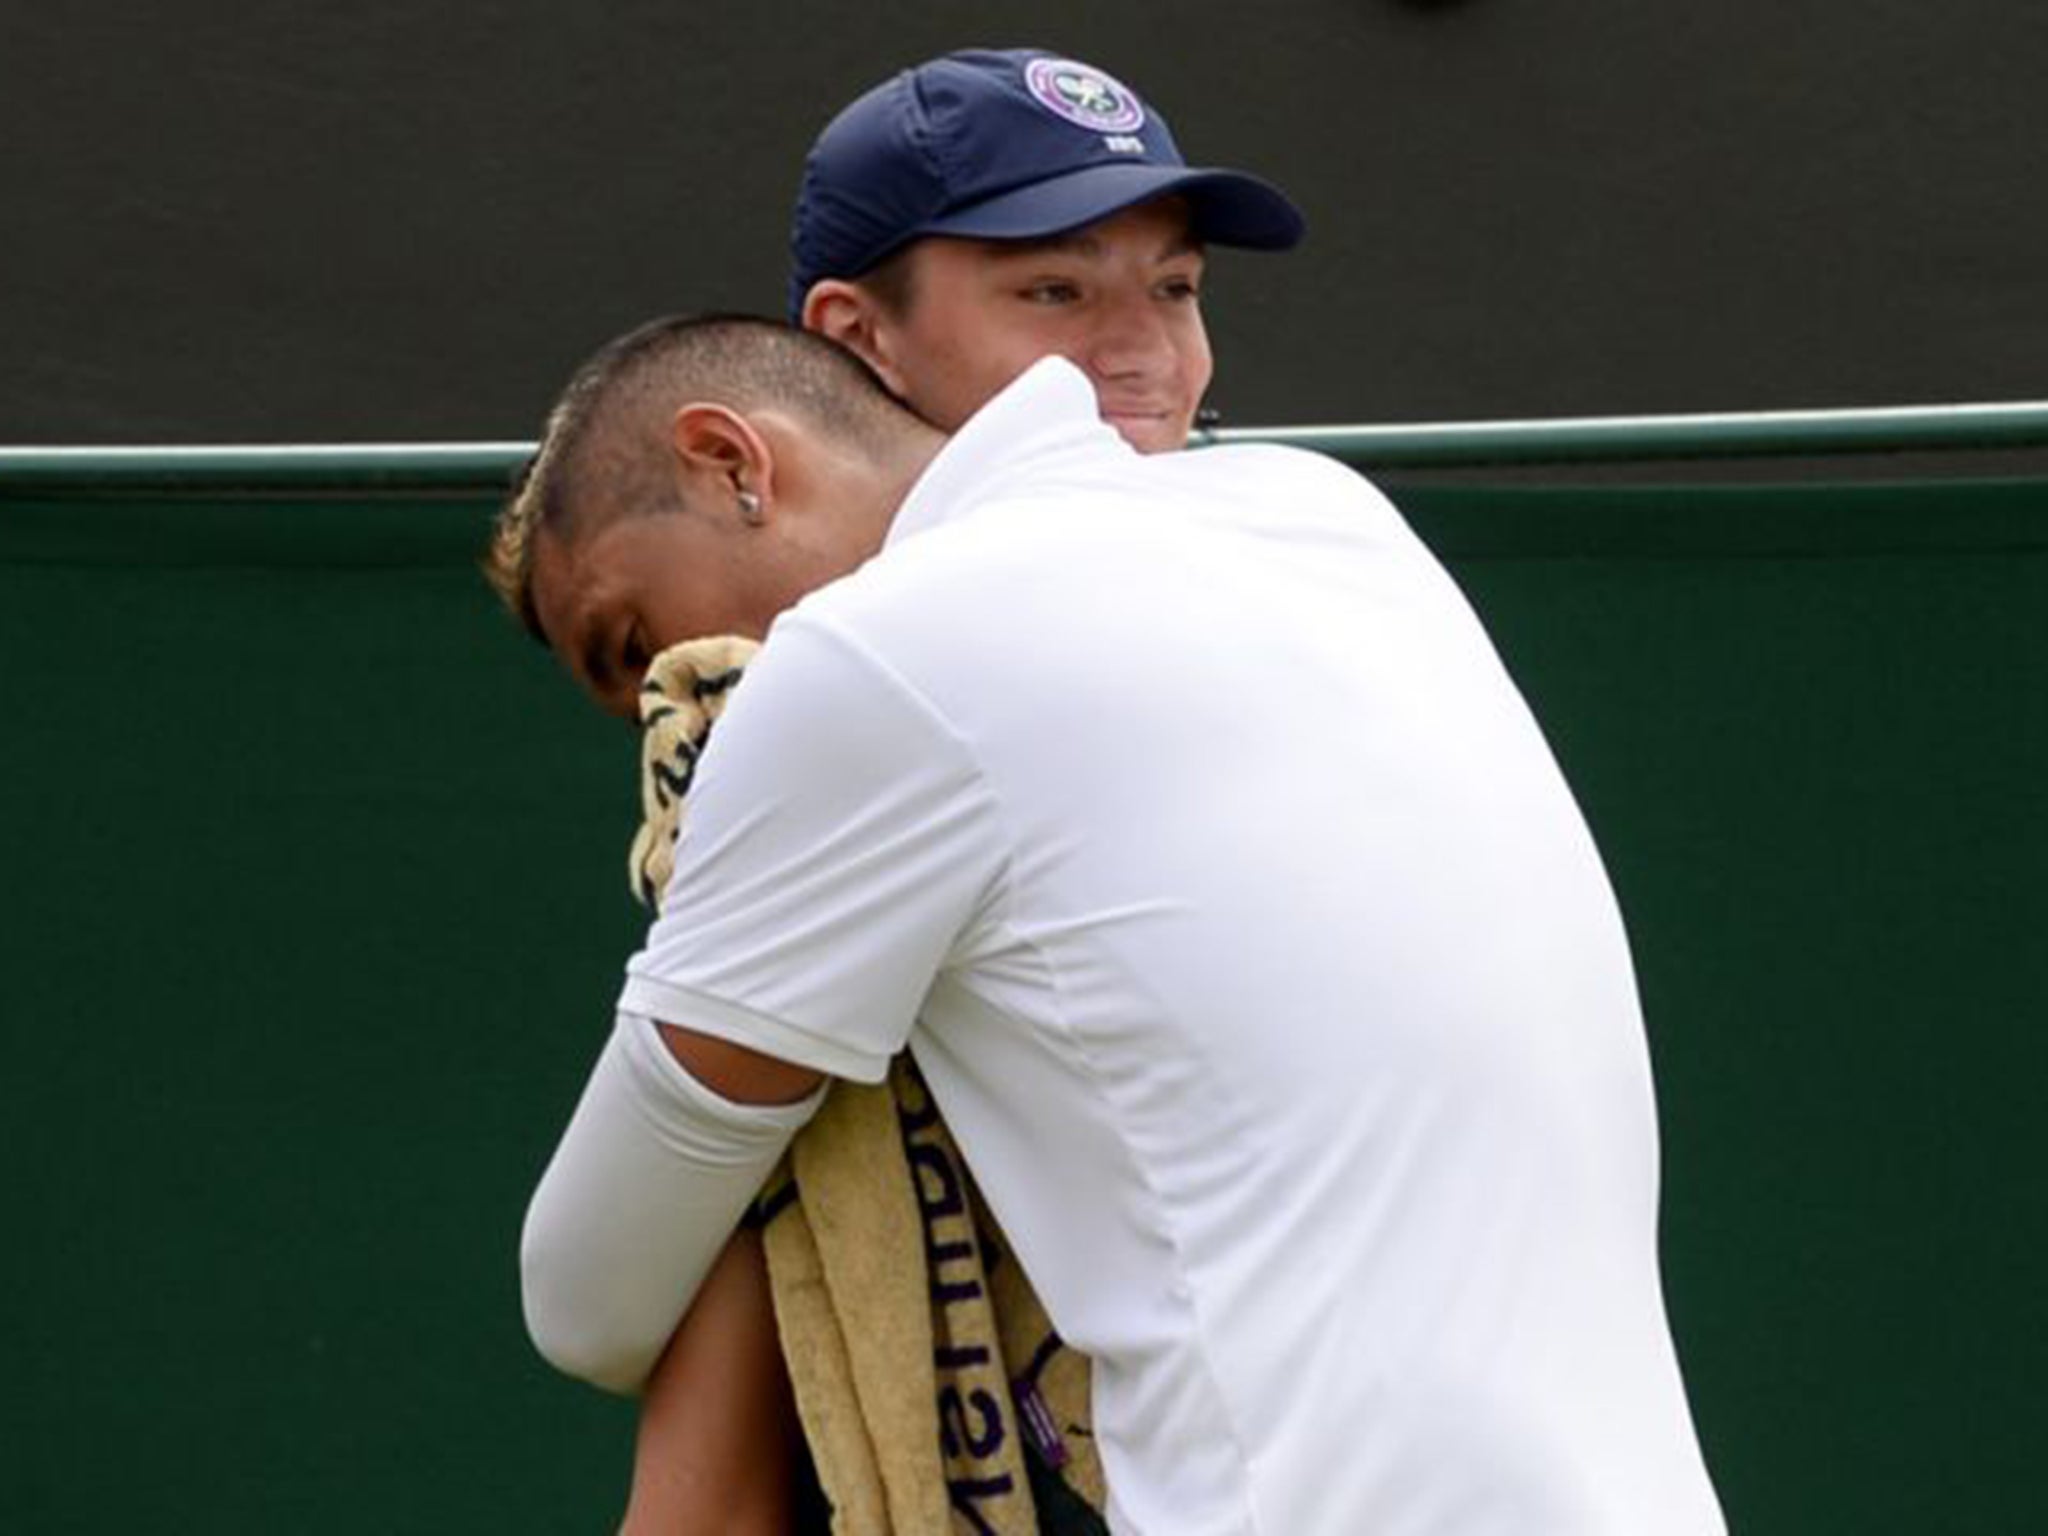 Nick Kyrgios embraces a ball boy during his fourth round match